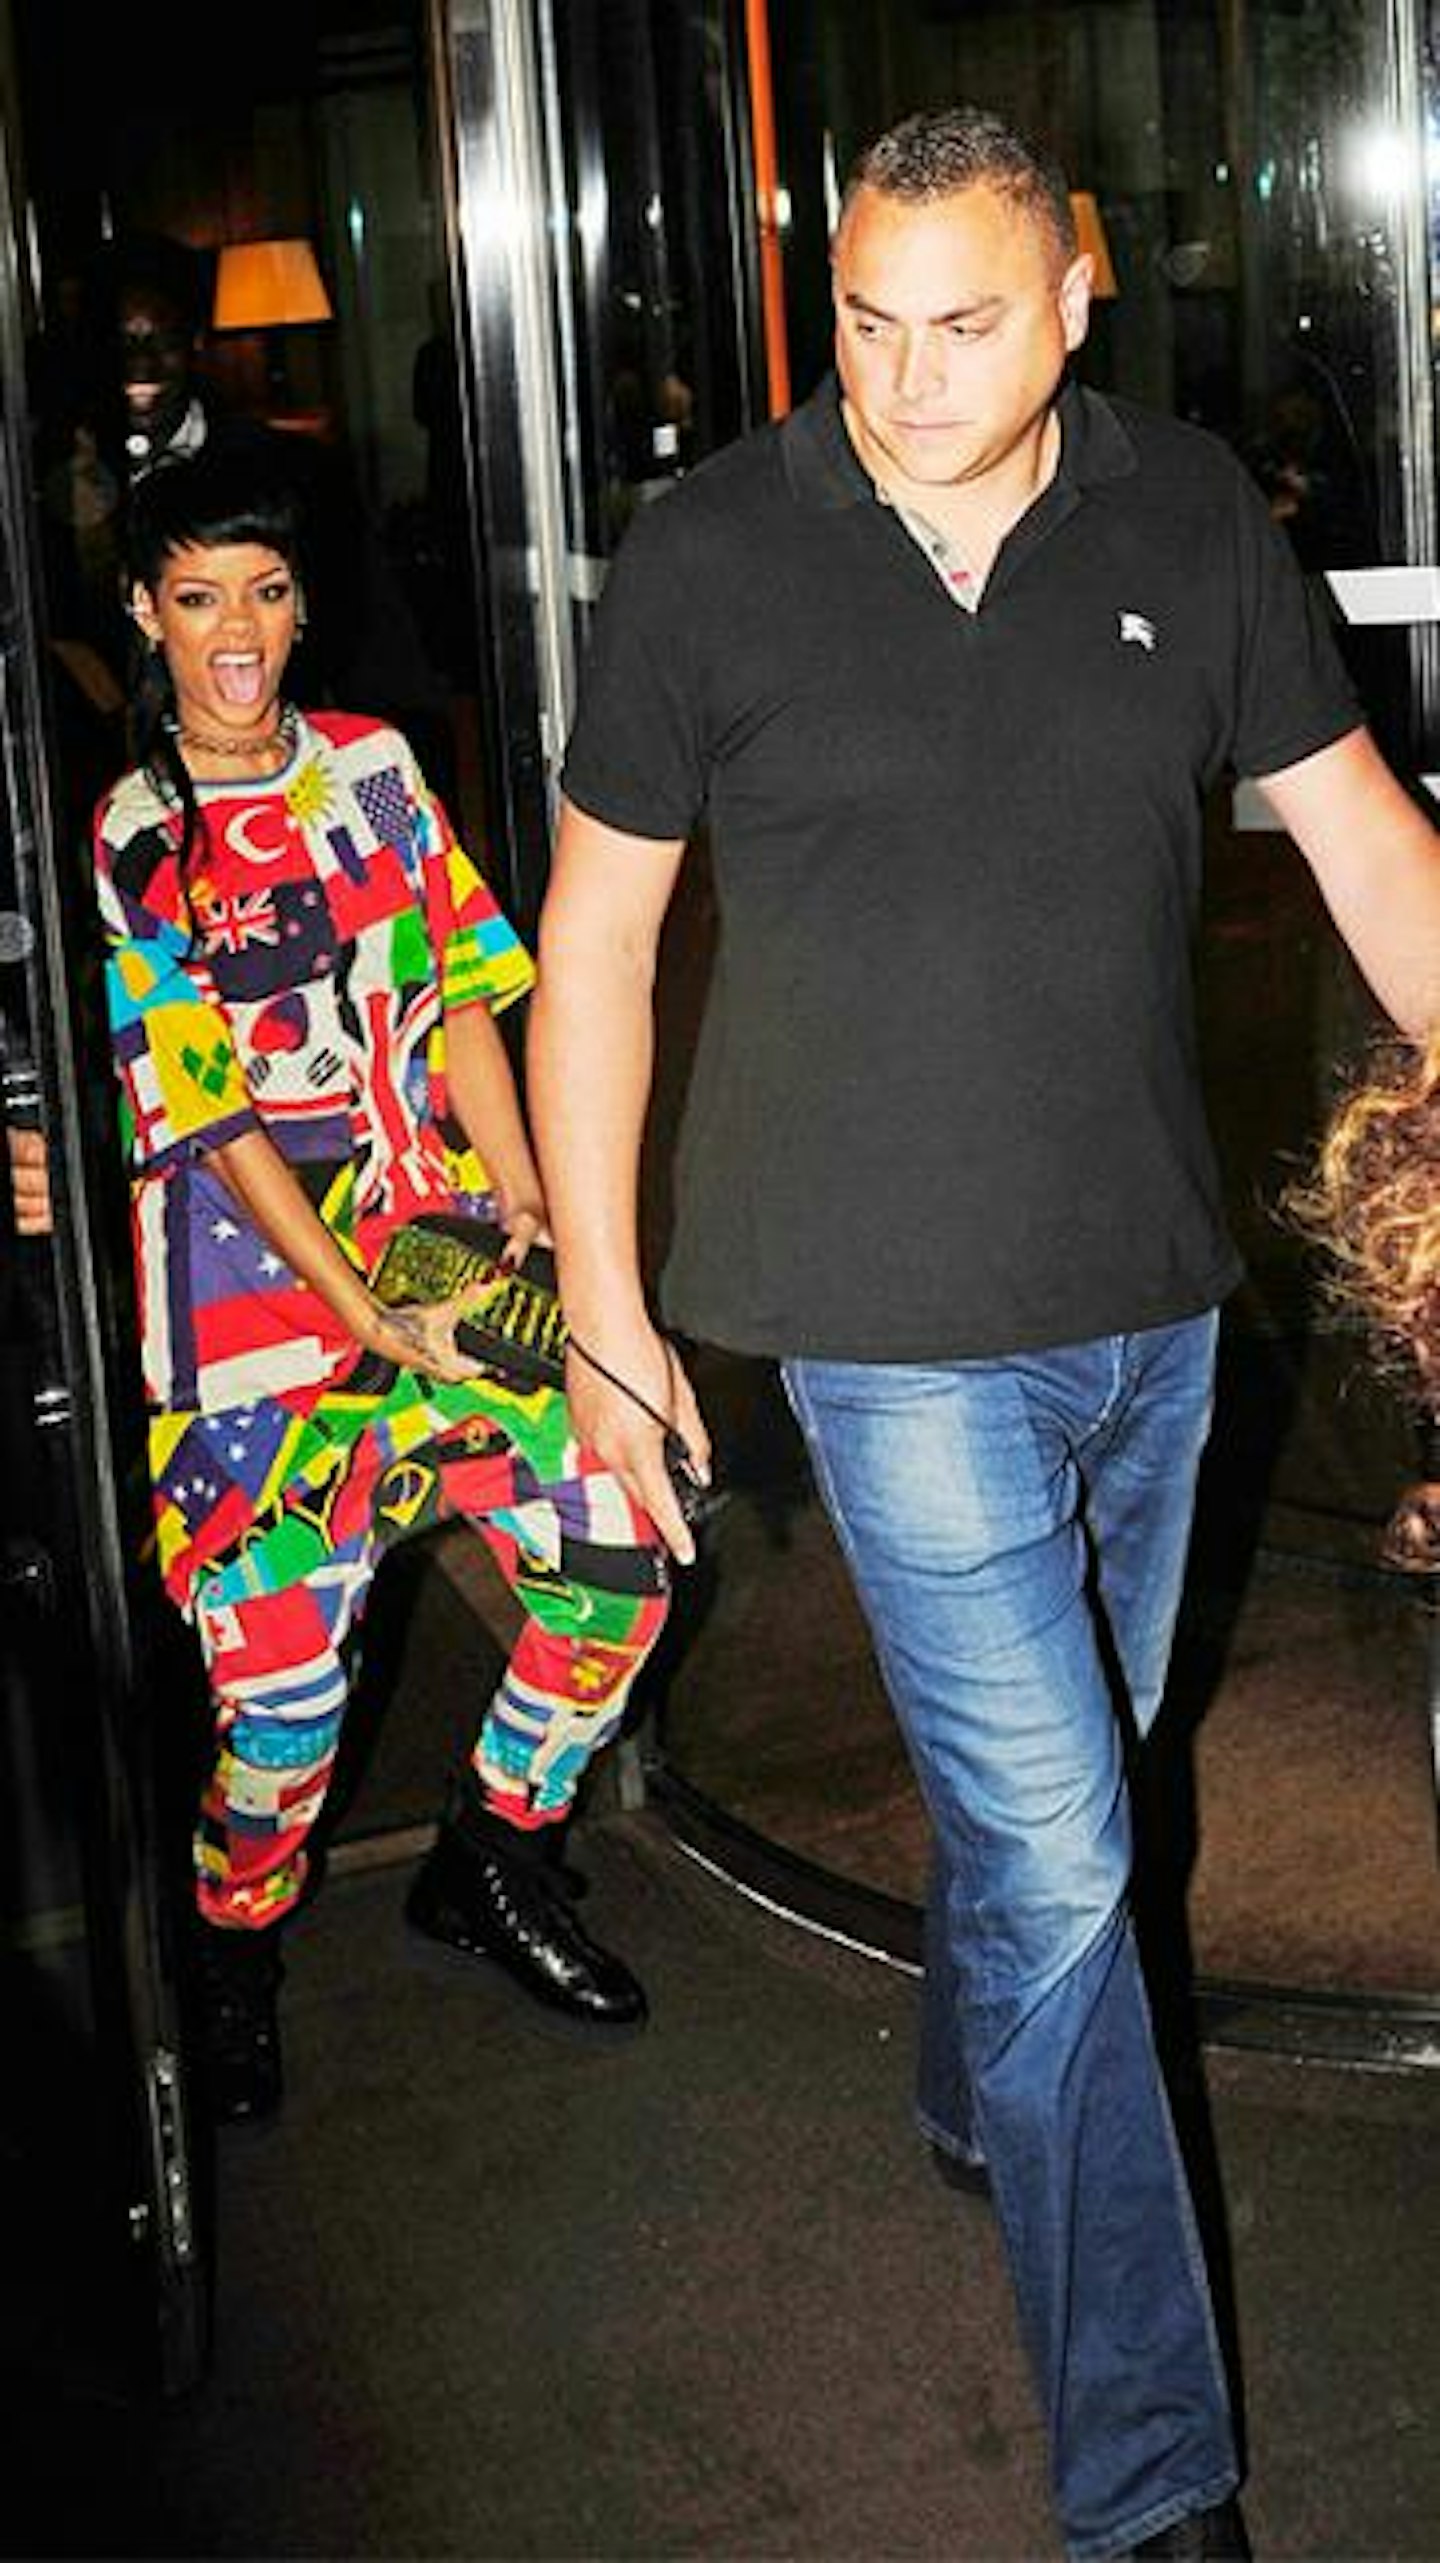 Rihanna playing a joke on her unsuspecting security guard...